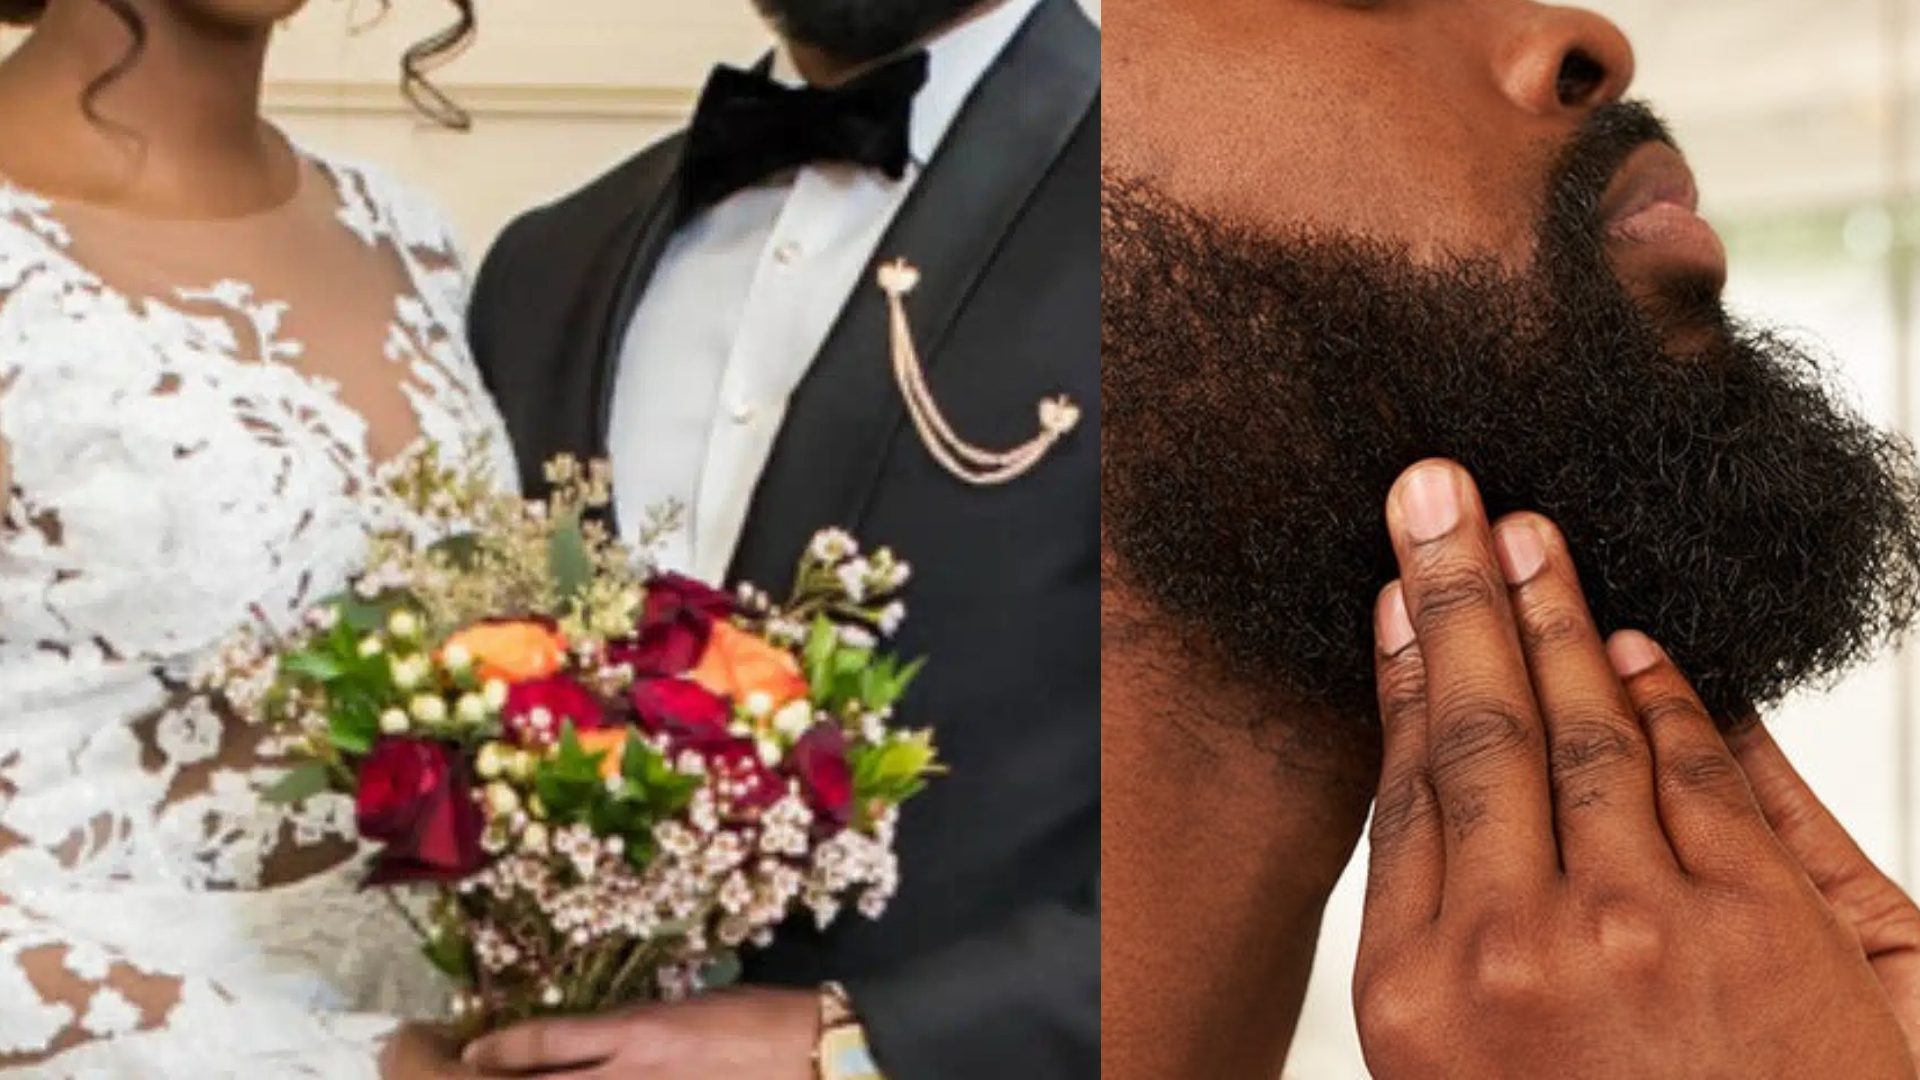 Man Calls Off Wedding After His Soon To Be Sister In Law Cut His Beards While Asleep